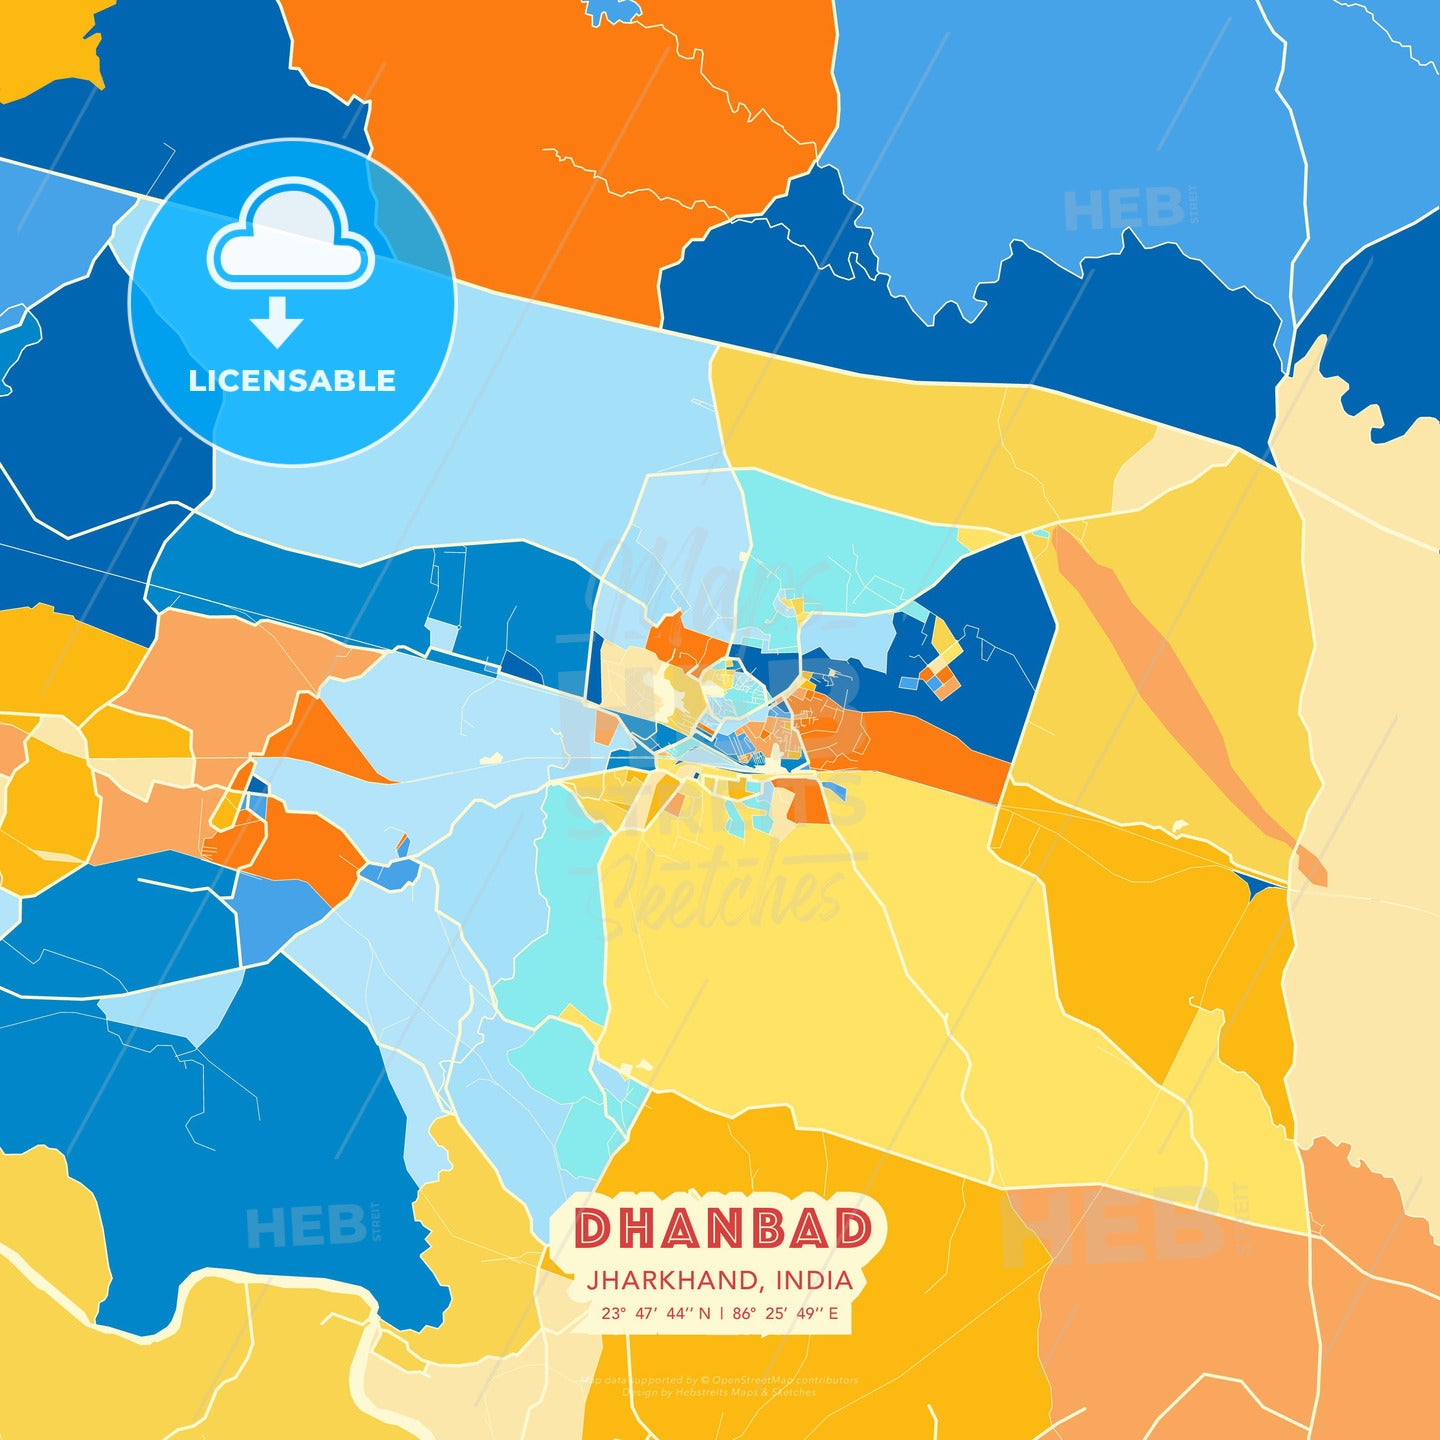 Dhanbad, Jharkhand, India, map - HEBSTREITS Sketches